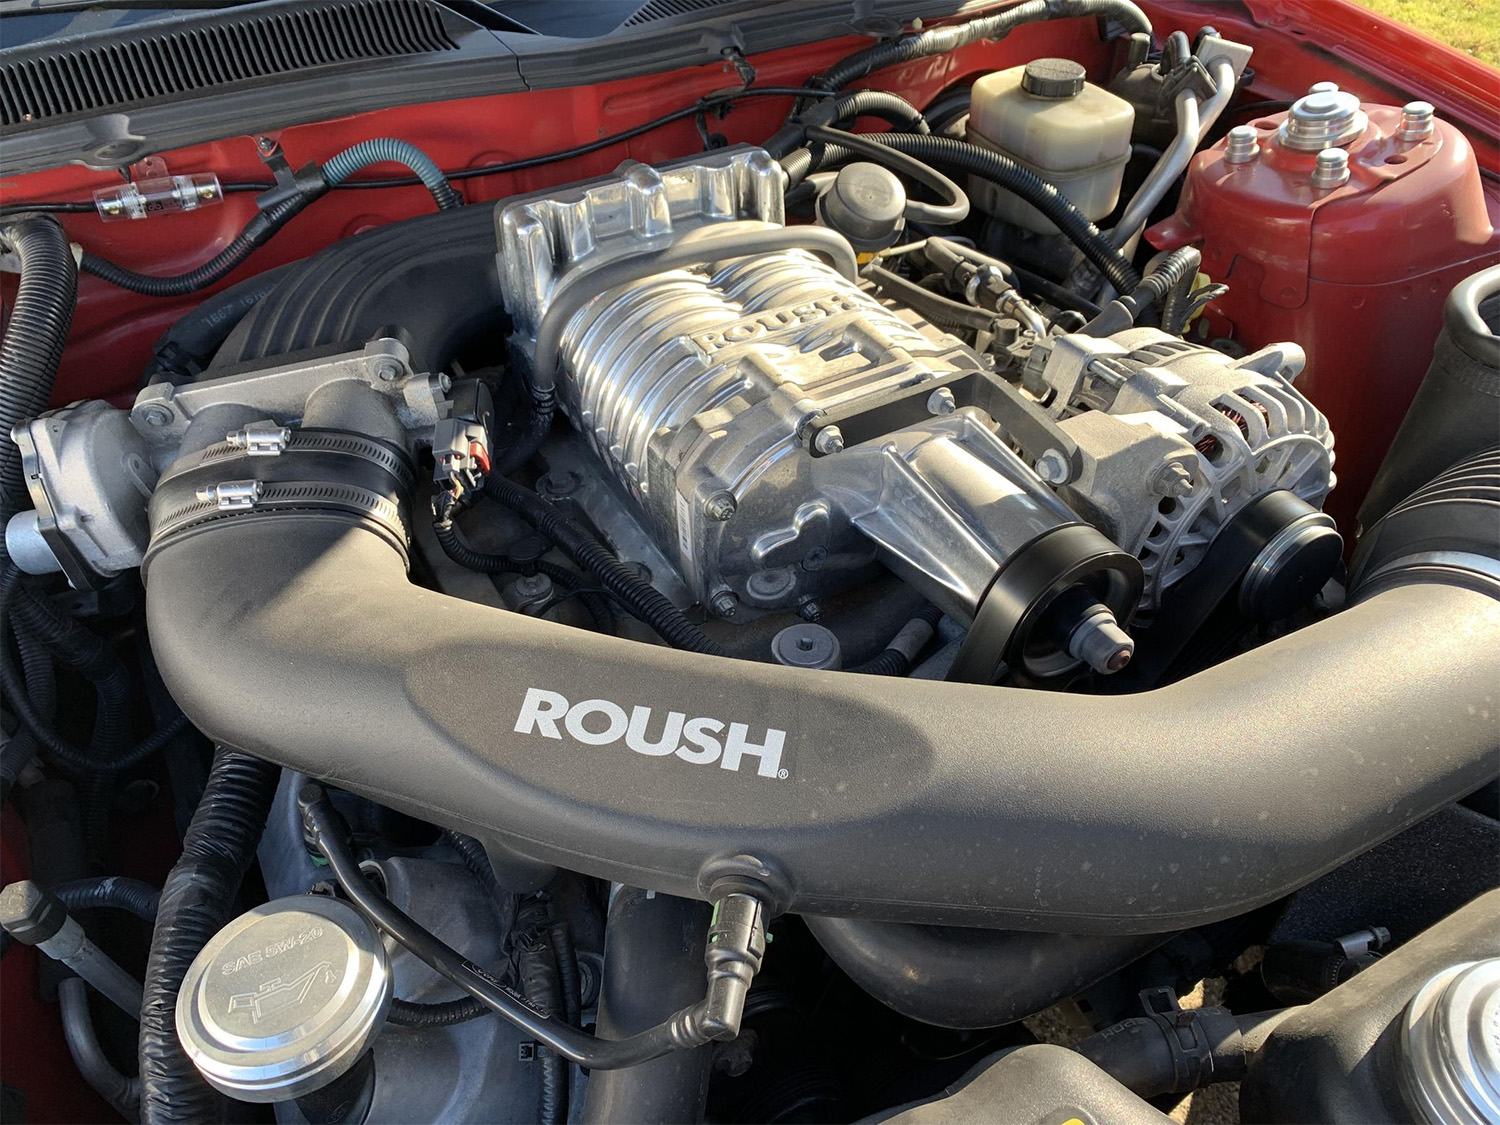 Roush supercharged 4.6L Ford V8 engine in 2008 428R coupe